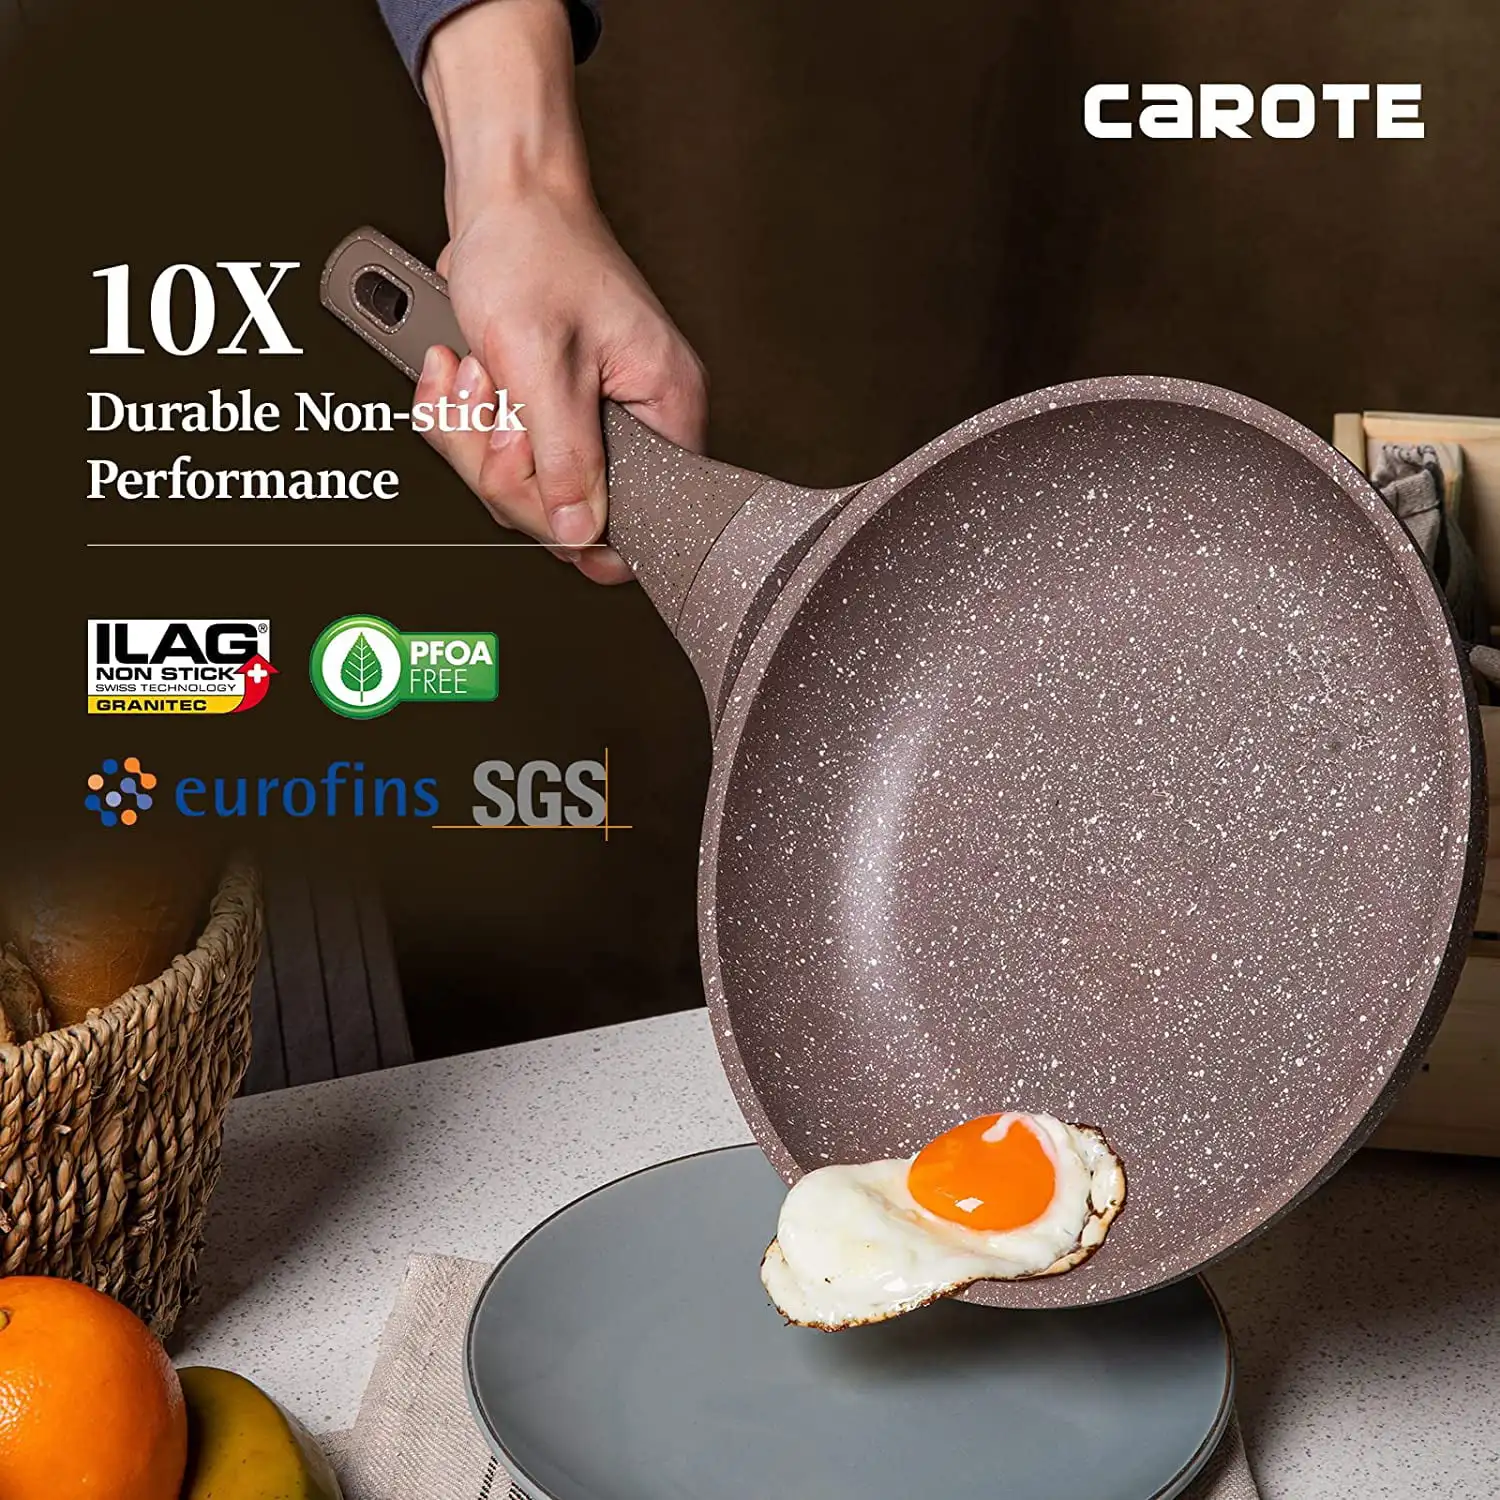 https://ae01.alicdn.com/kf/S312de3dd7c0f4af78843f6bf6377eed5f/Carote-Nonstick-Granite-Cookware-Sets-9-Pcs-Brown-Granite-Pots-and-Pans-Set-Induction-Stone-Kitchen.jpg